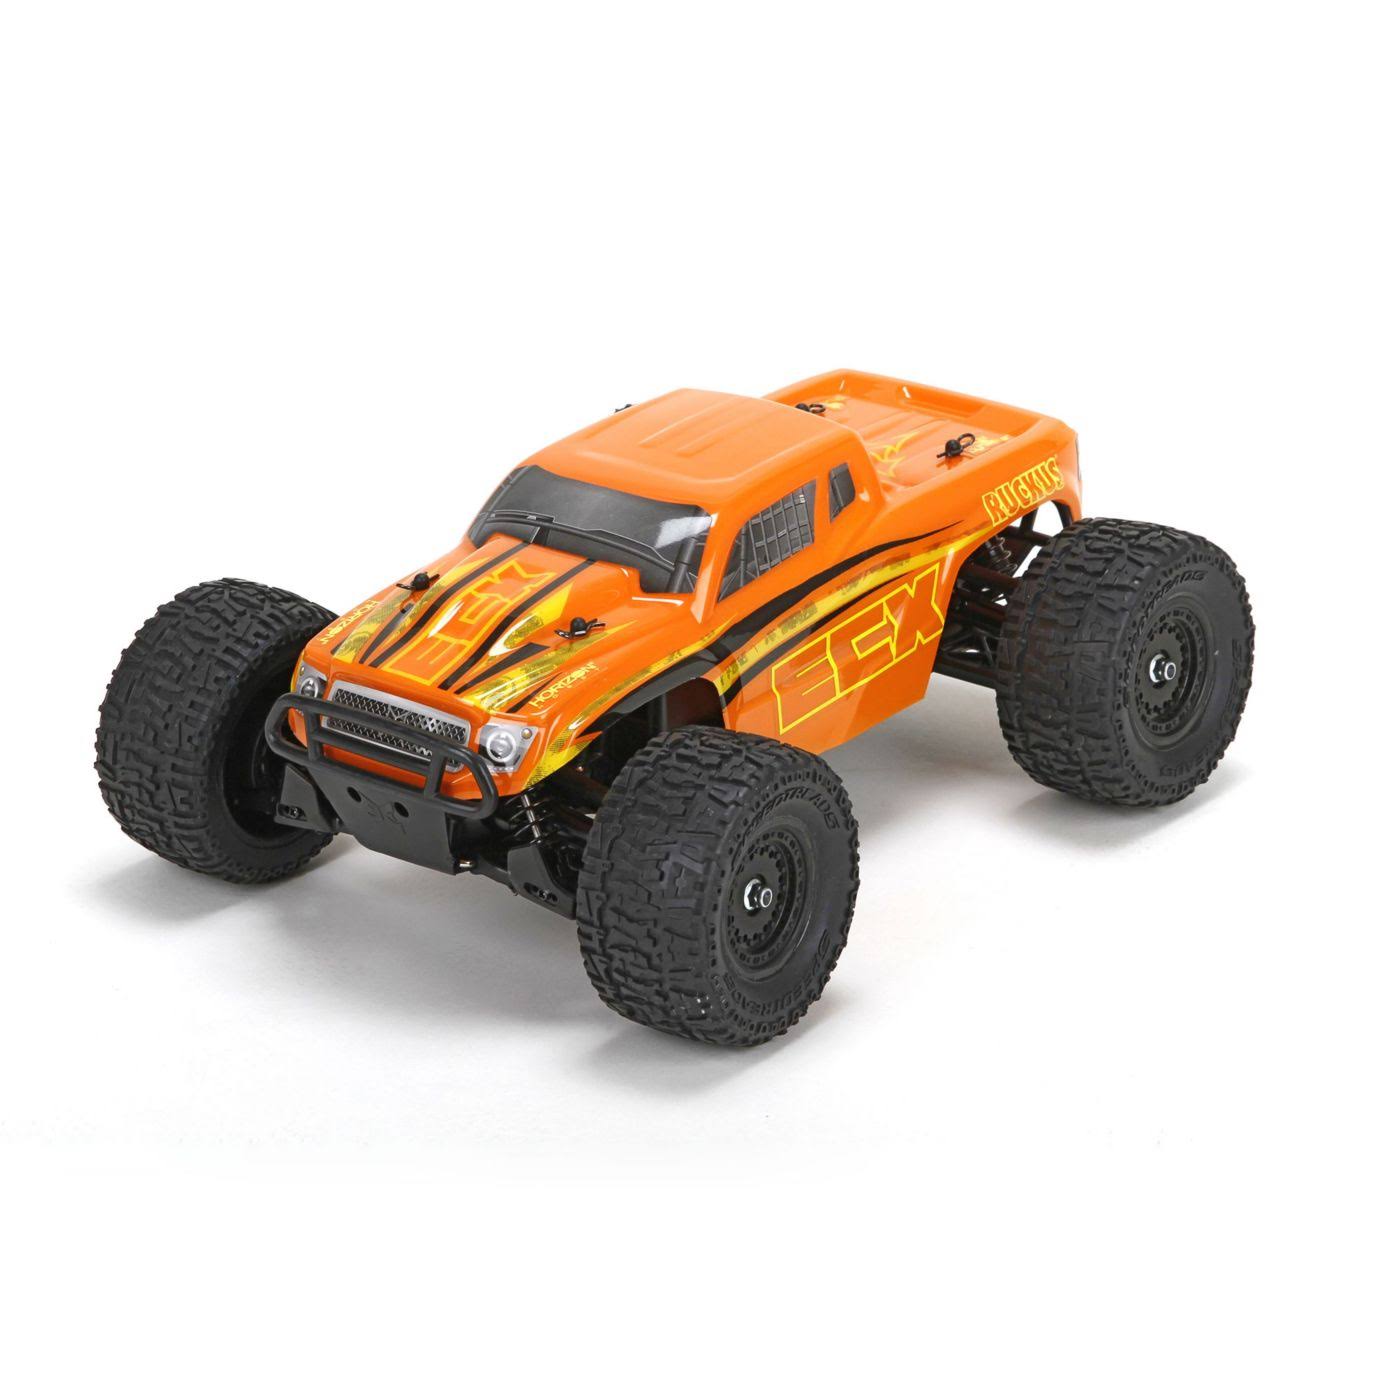 ECX Ruckus Rtr 4wd Electric Monster Truck - 1:18 Scale